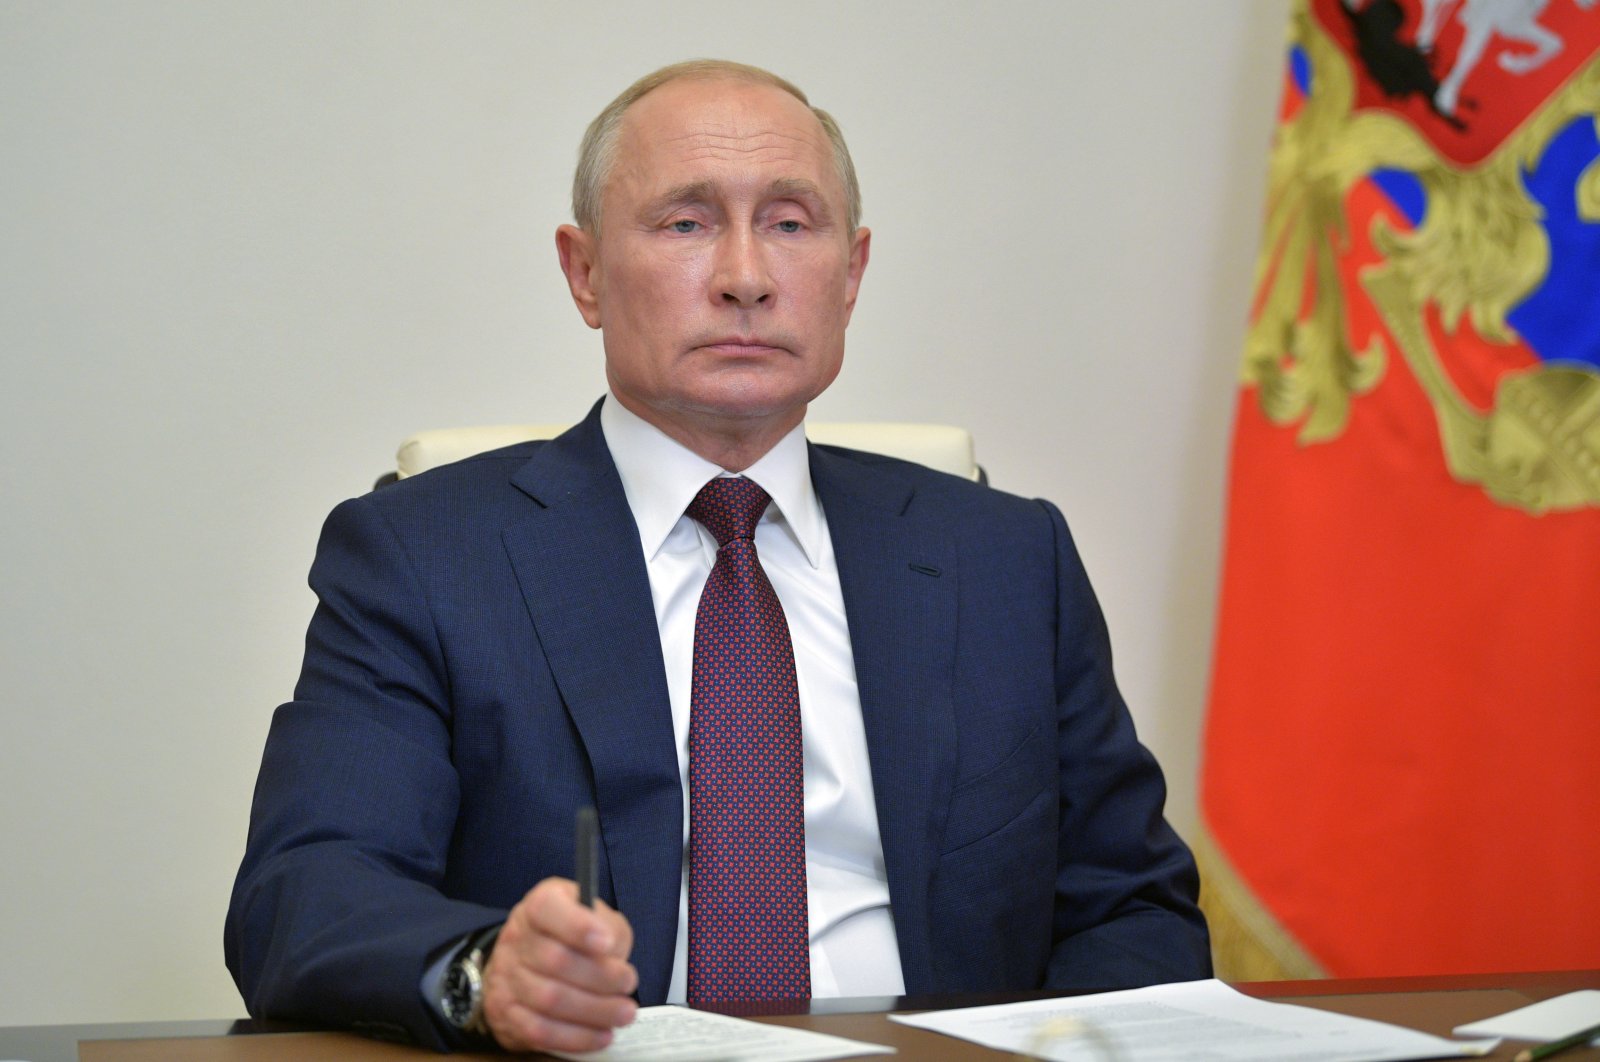 Russian President Vladimir Putin chairs a meeting with members of a working group to prepare proposals on amending the Russian Constitution via teleconference in Moscow, July 3, 2020. (AP Photo)